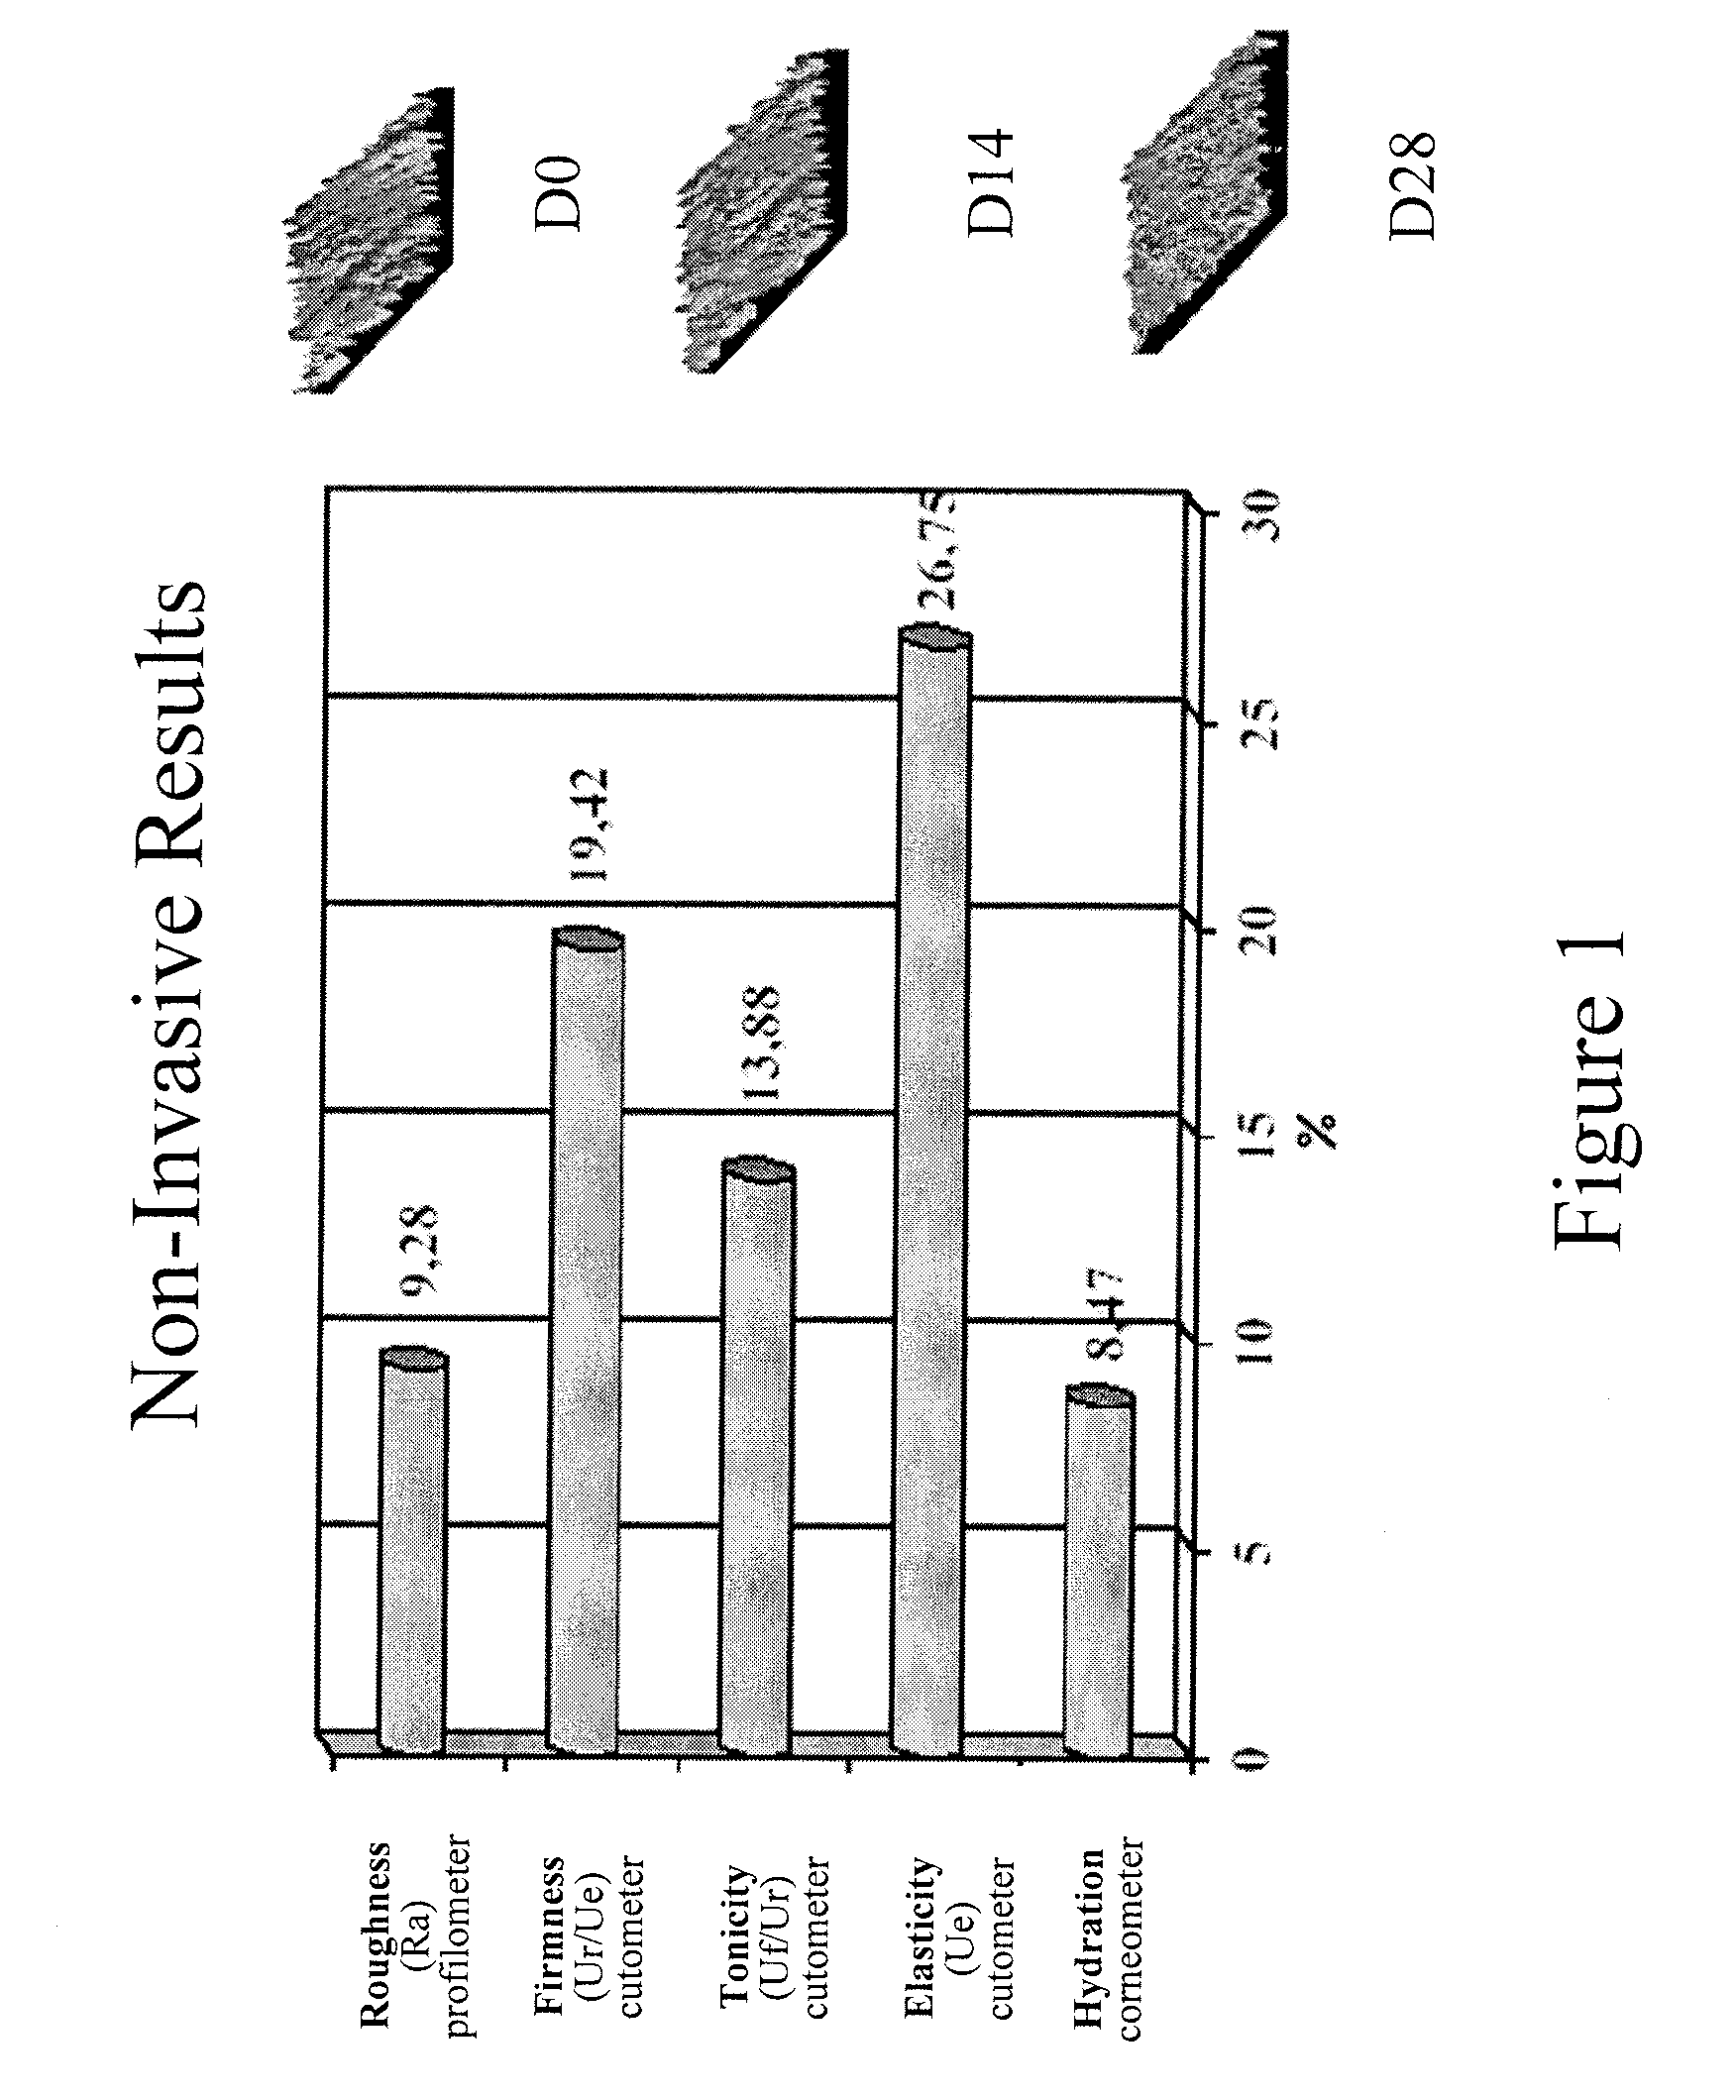 Anti-aging composition, kit and method of use